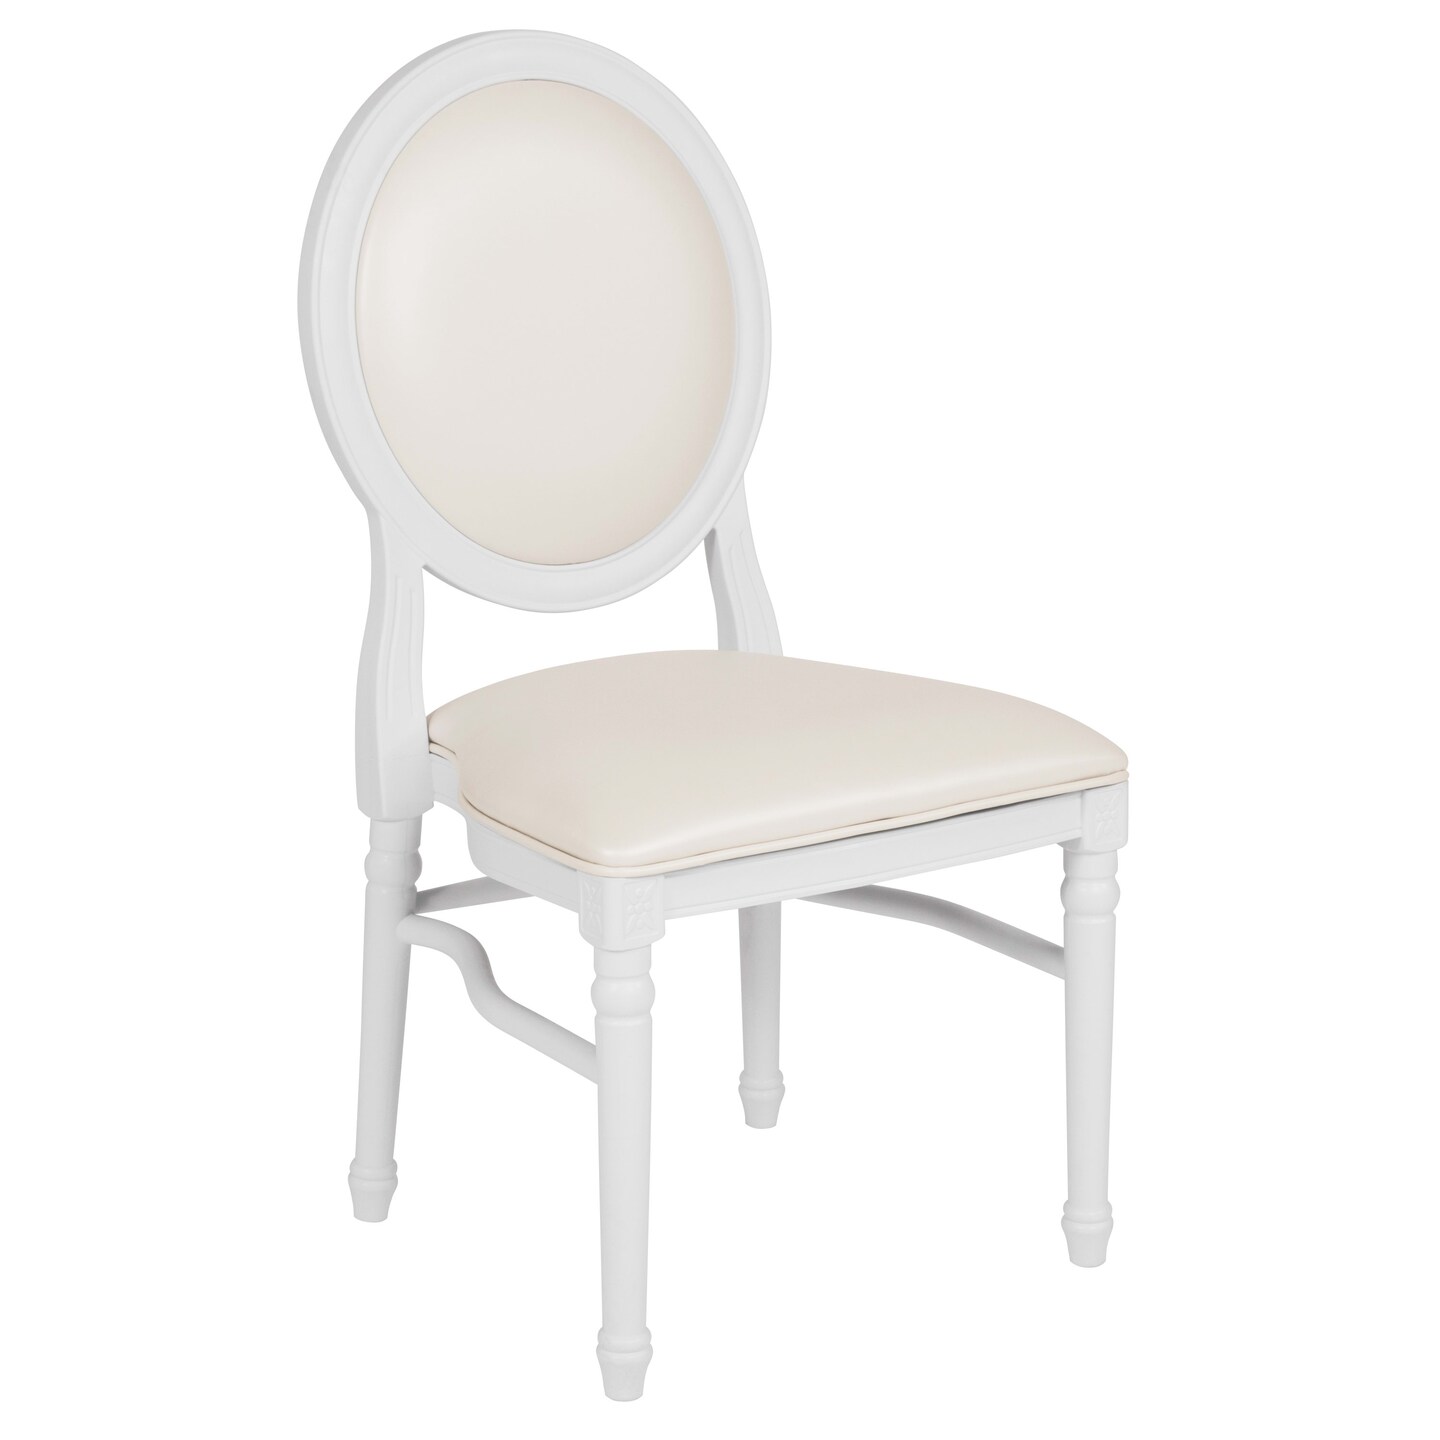 king louis dining chair